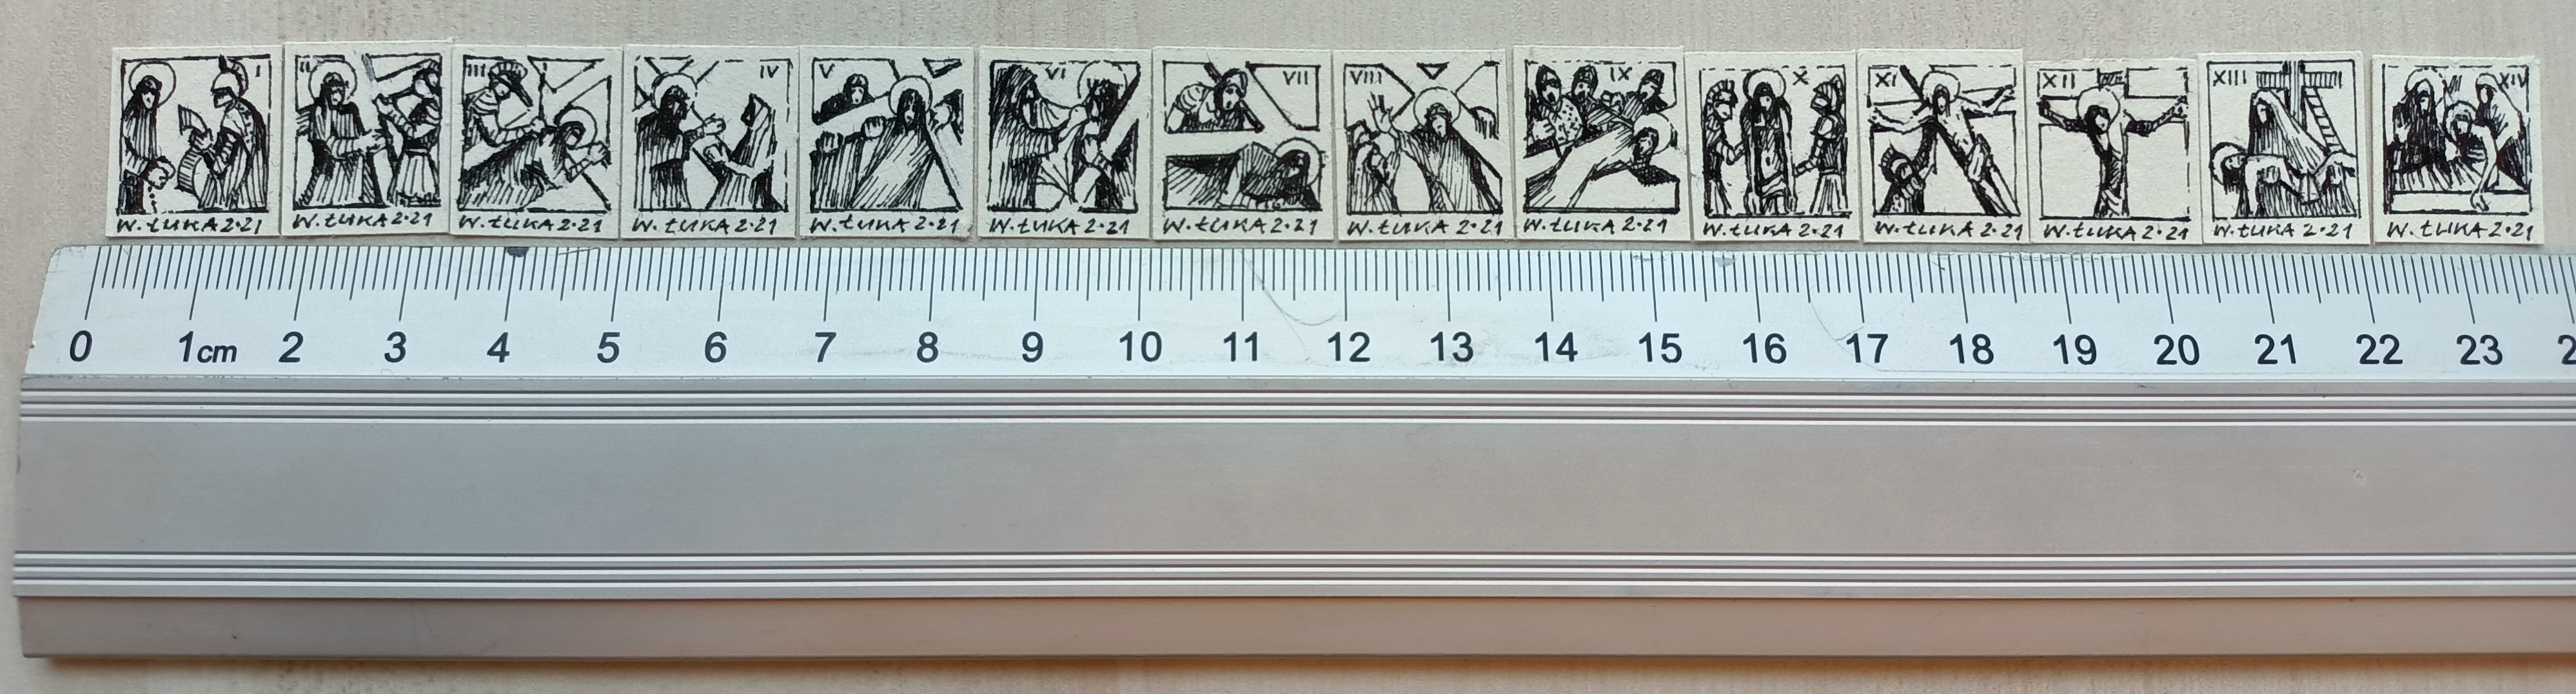 The Stations of the Cross (is one of the smallest in the world);[6][7] 2021; black ink on paper; a set of the traditional 14 scenes (14 a squares 15 x 15 mm) from Muzeum Miniaturowej Sztuki Profesjonalnej Henryk Jan Dominiak in Tychy.